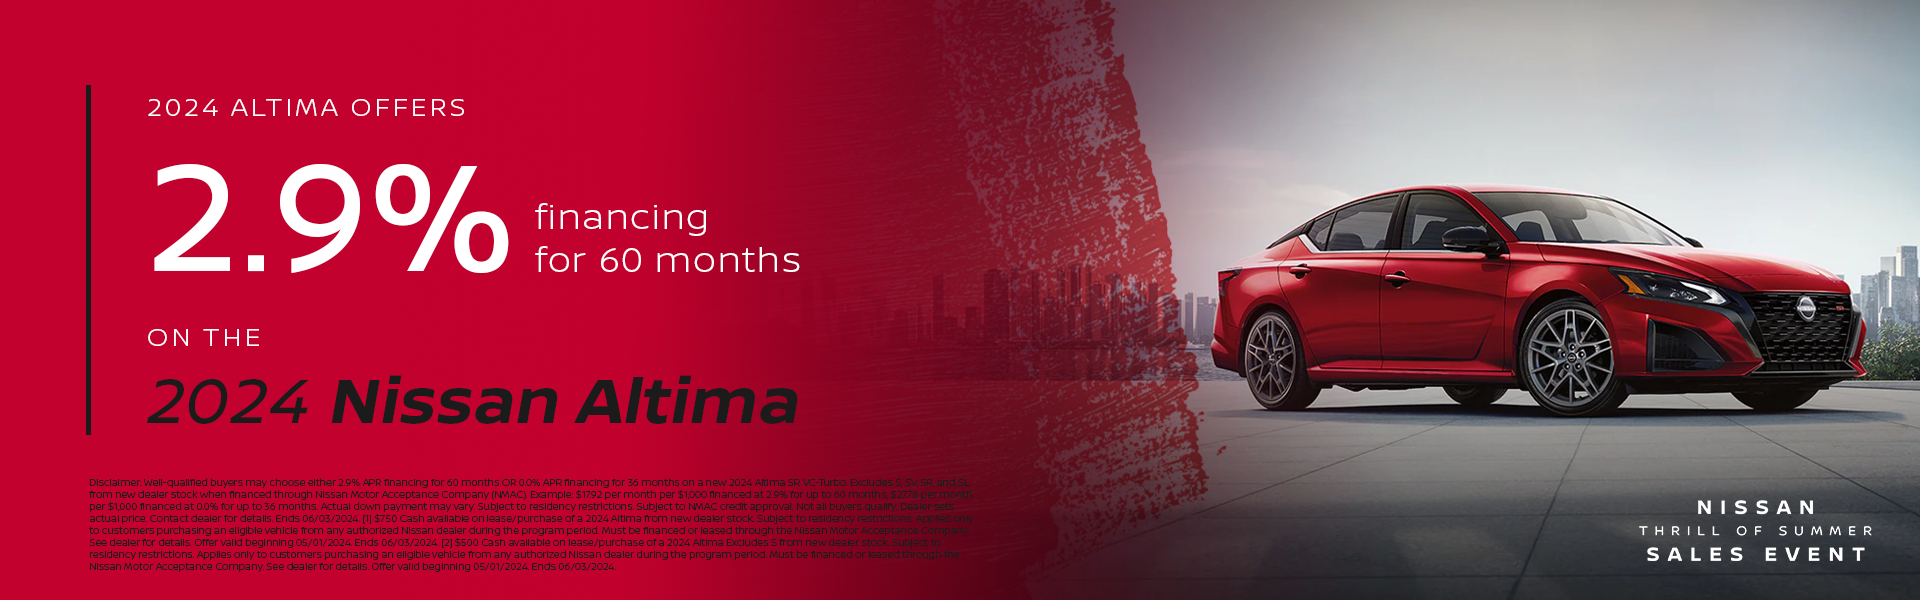 2.9% APR financing for 60 months on 2024 Nissan Altima